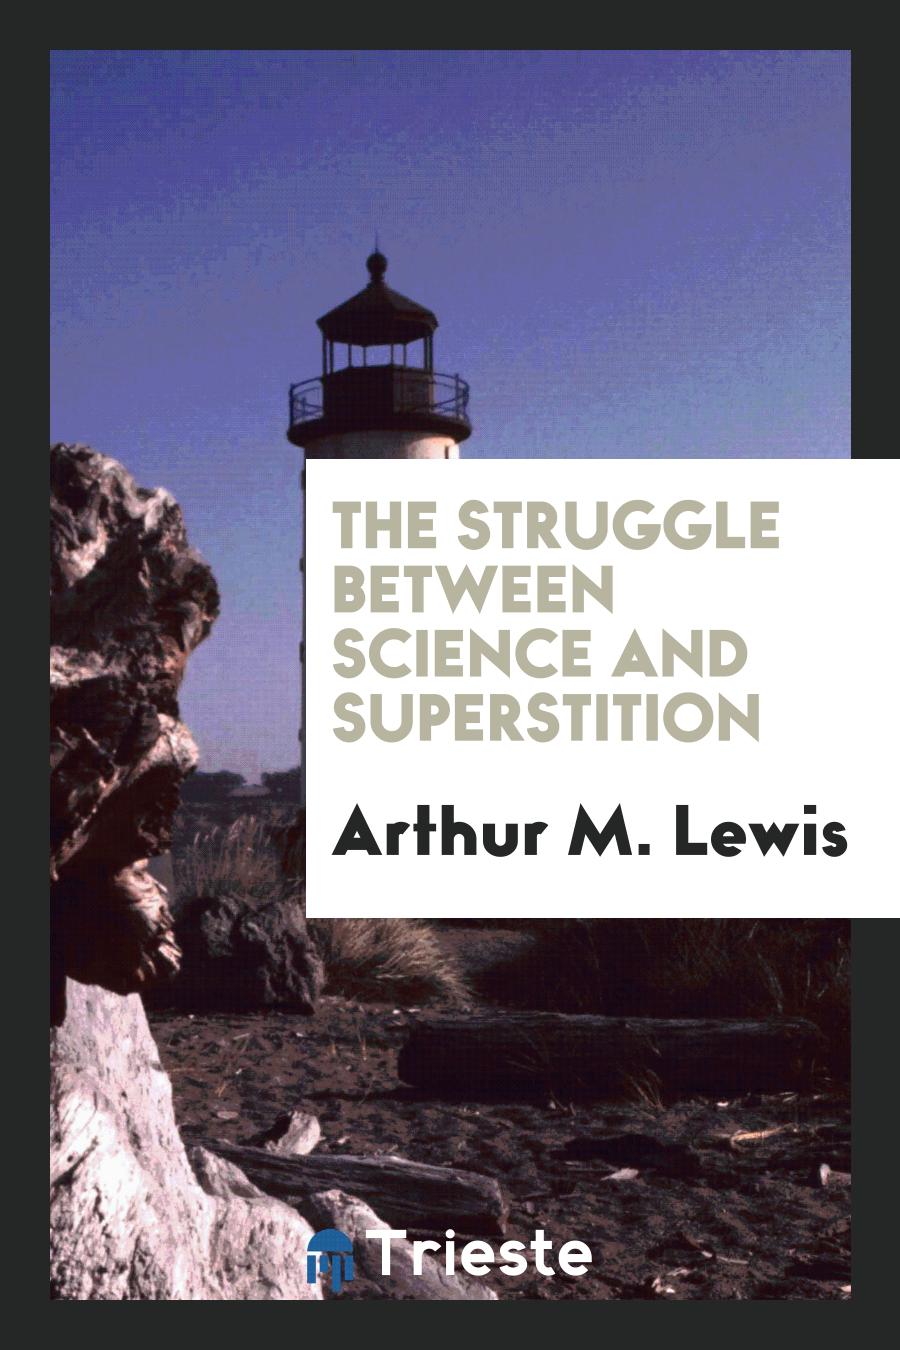 The struggle between science and superstition